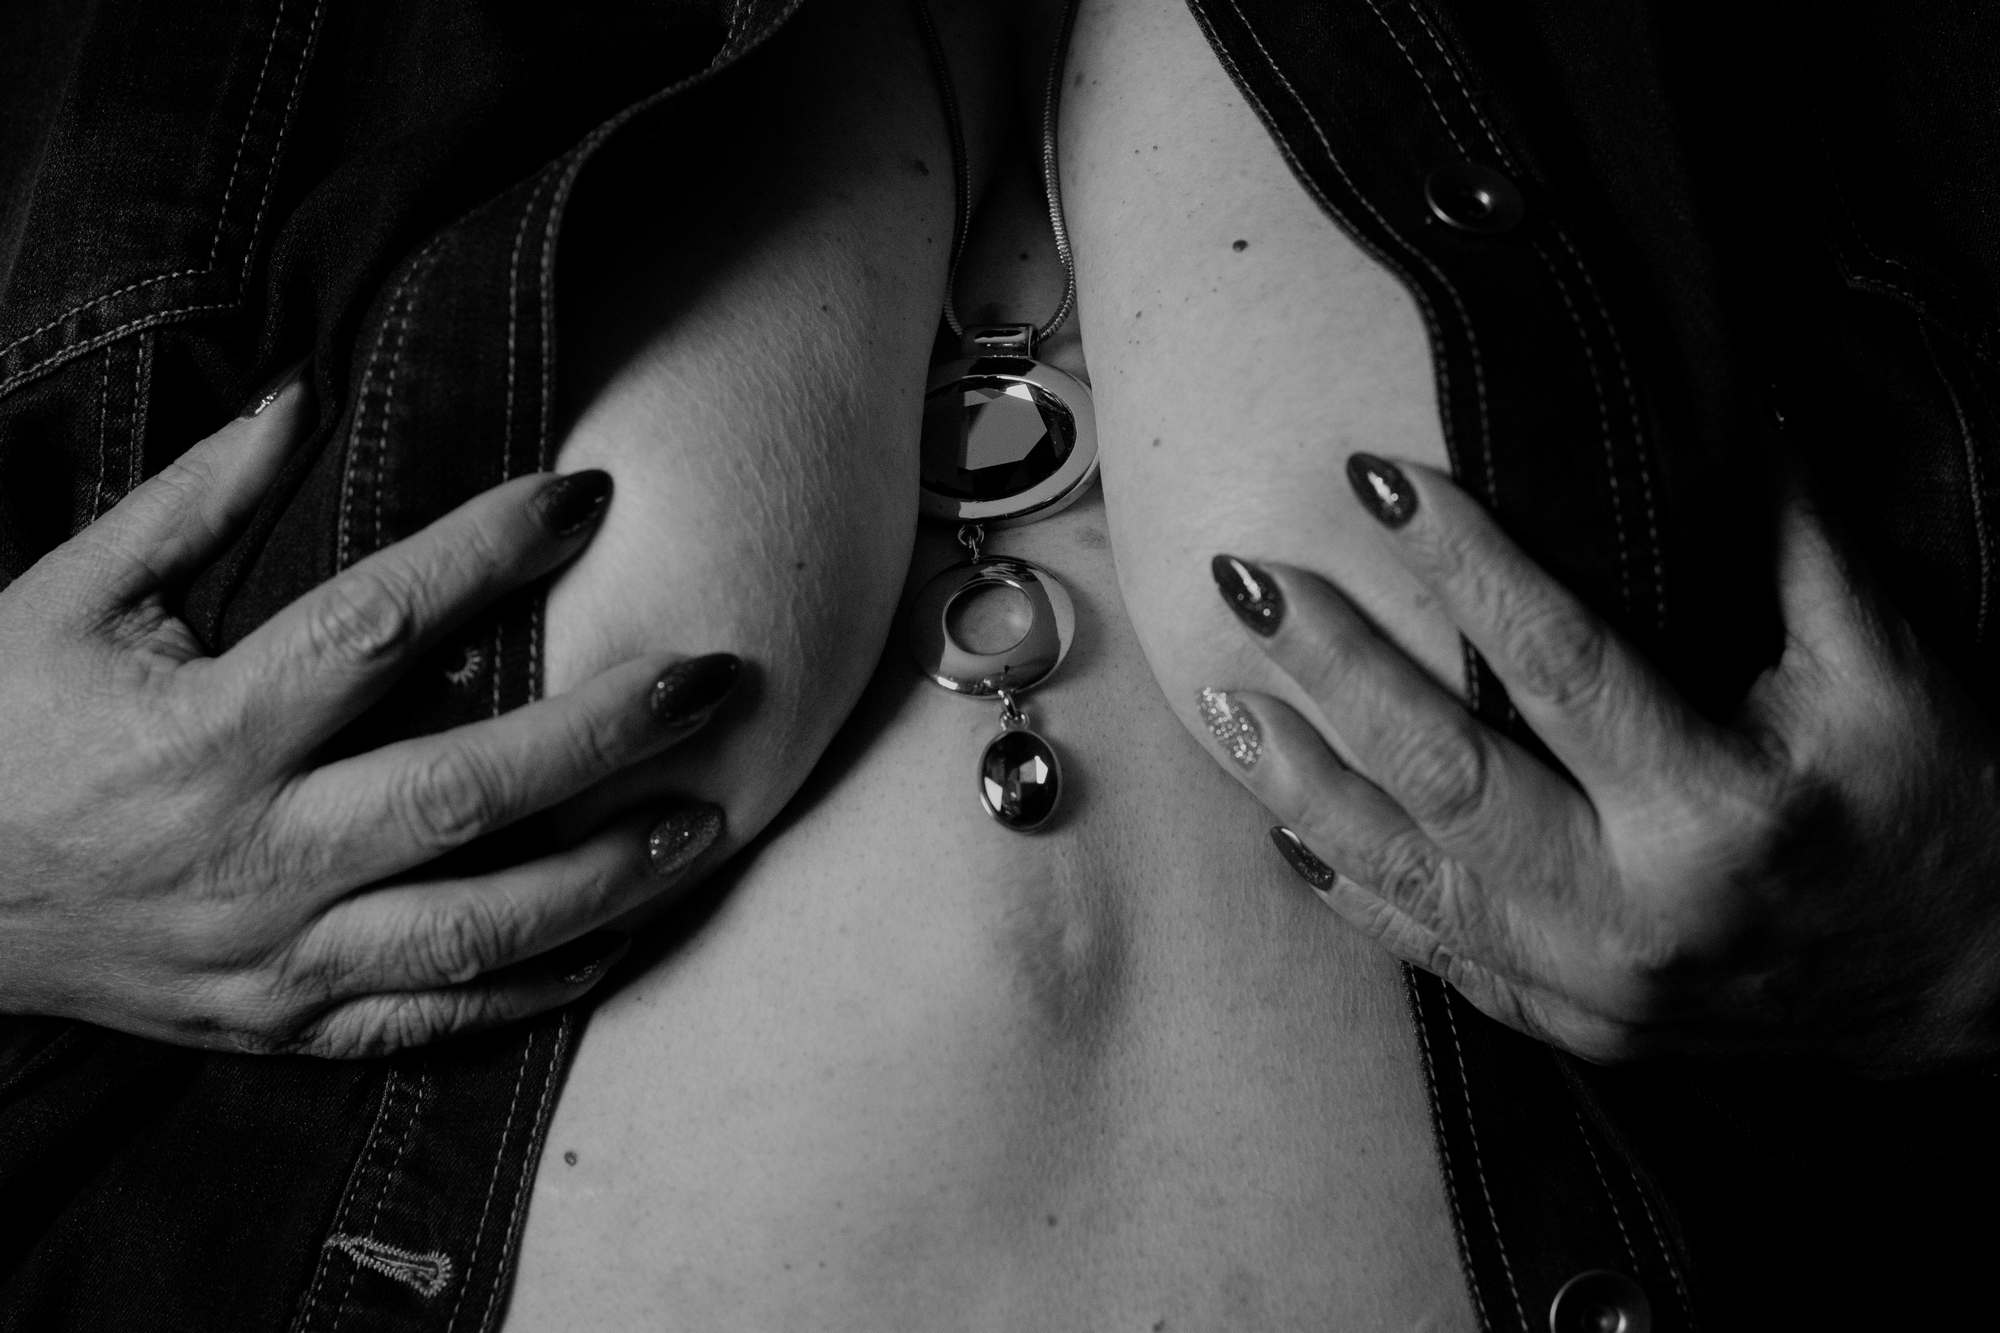  A woman covers her breasts with her hands, showing a necklace between them 